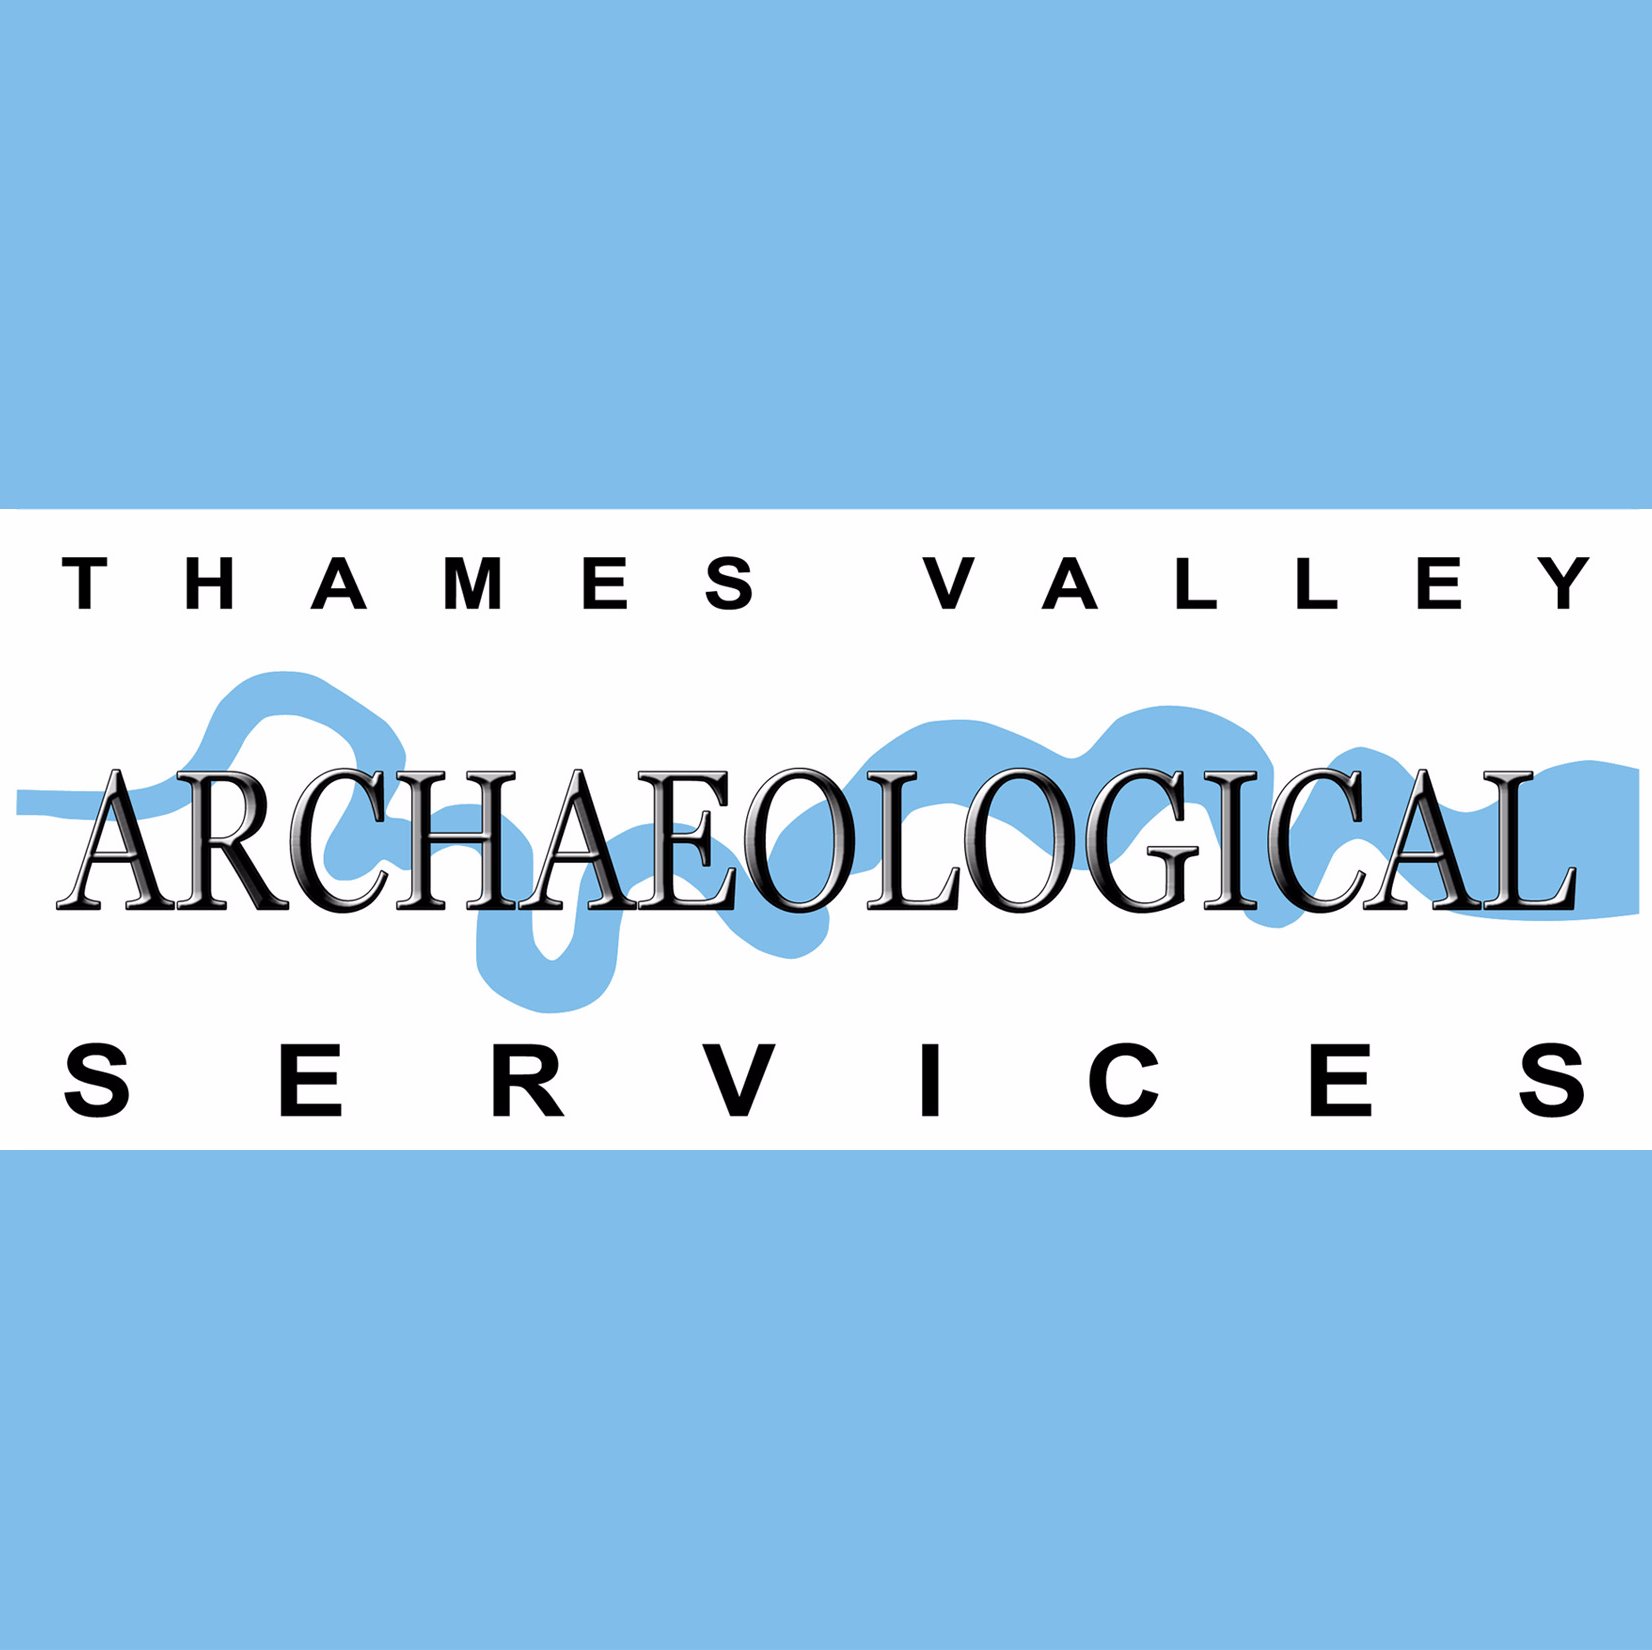 With over twenty five years' experience providing a full range of archaeological services with projects tailored to meet the needs of stakeholders.